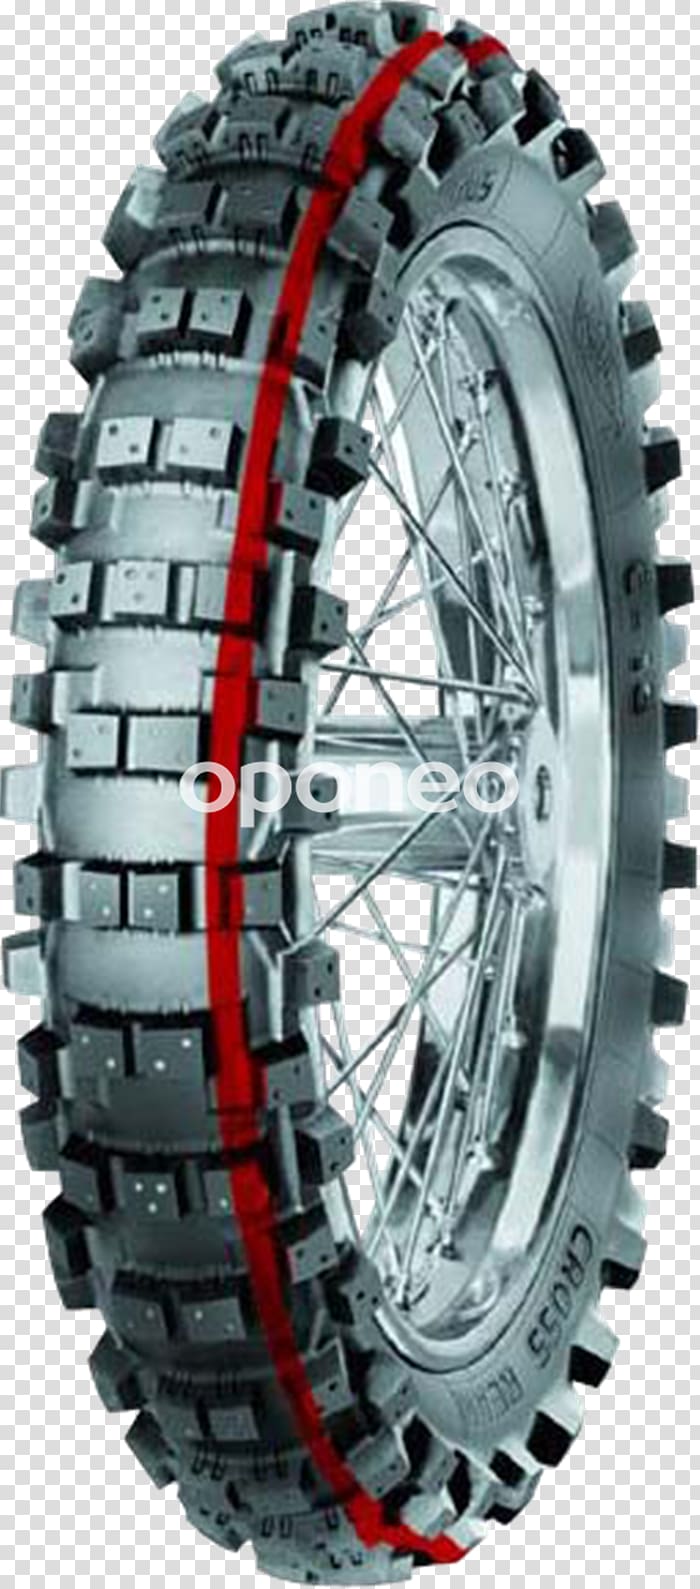 Motorcycle Tires Motorcycle Tires Guma Metzeler, motorcycle transparent background PNG clipart